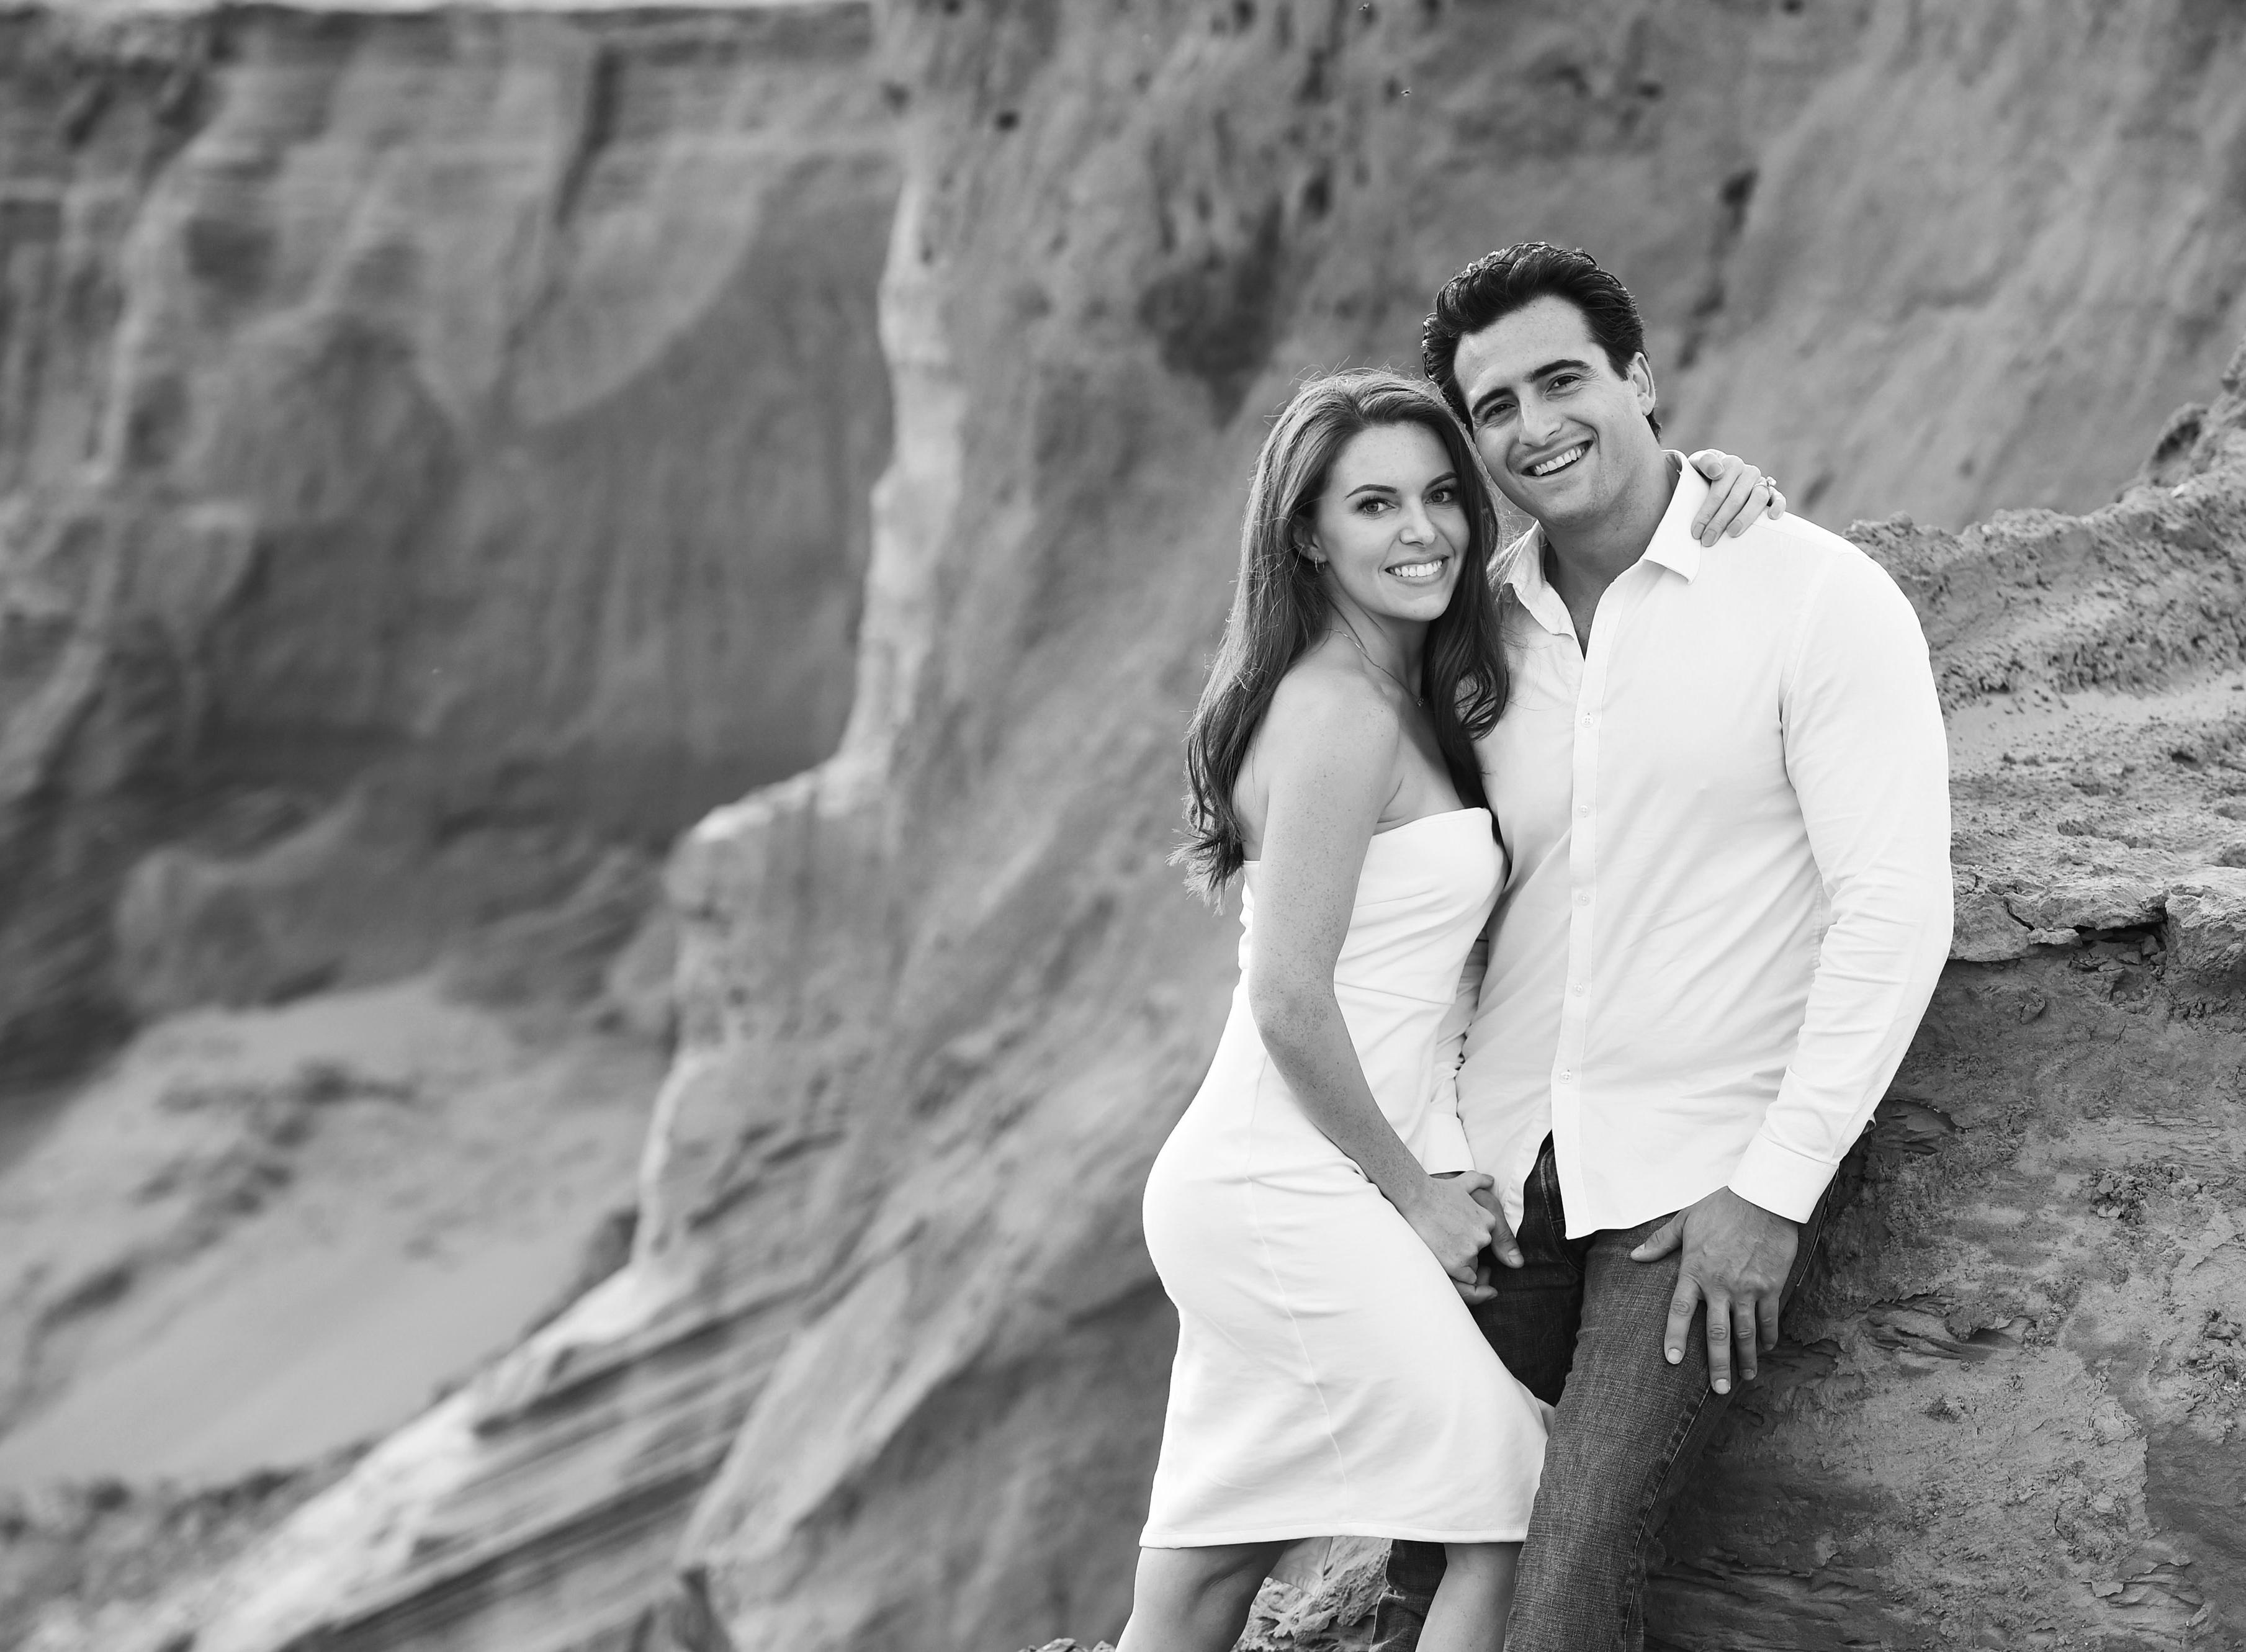 The Wedding Website of Kelly Powell and Giovanni Oliverio